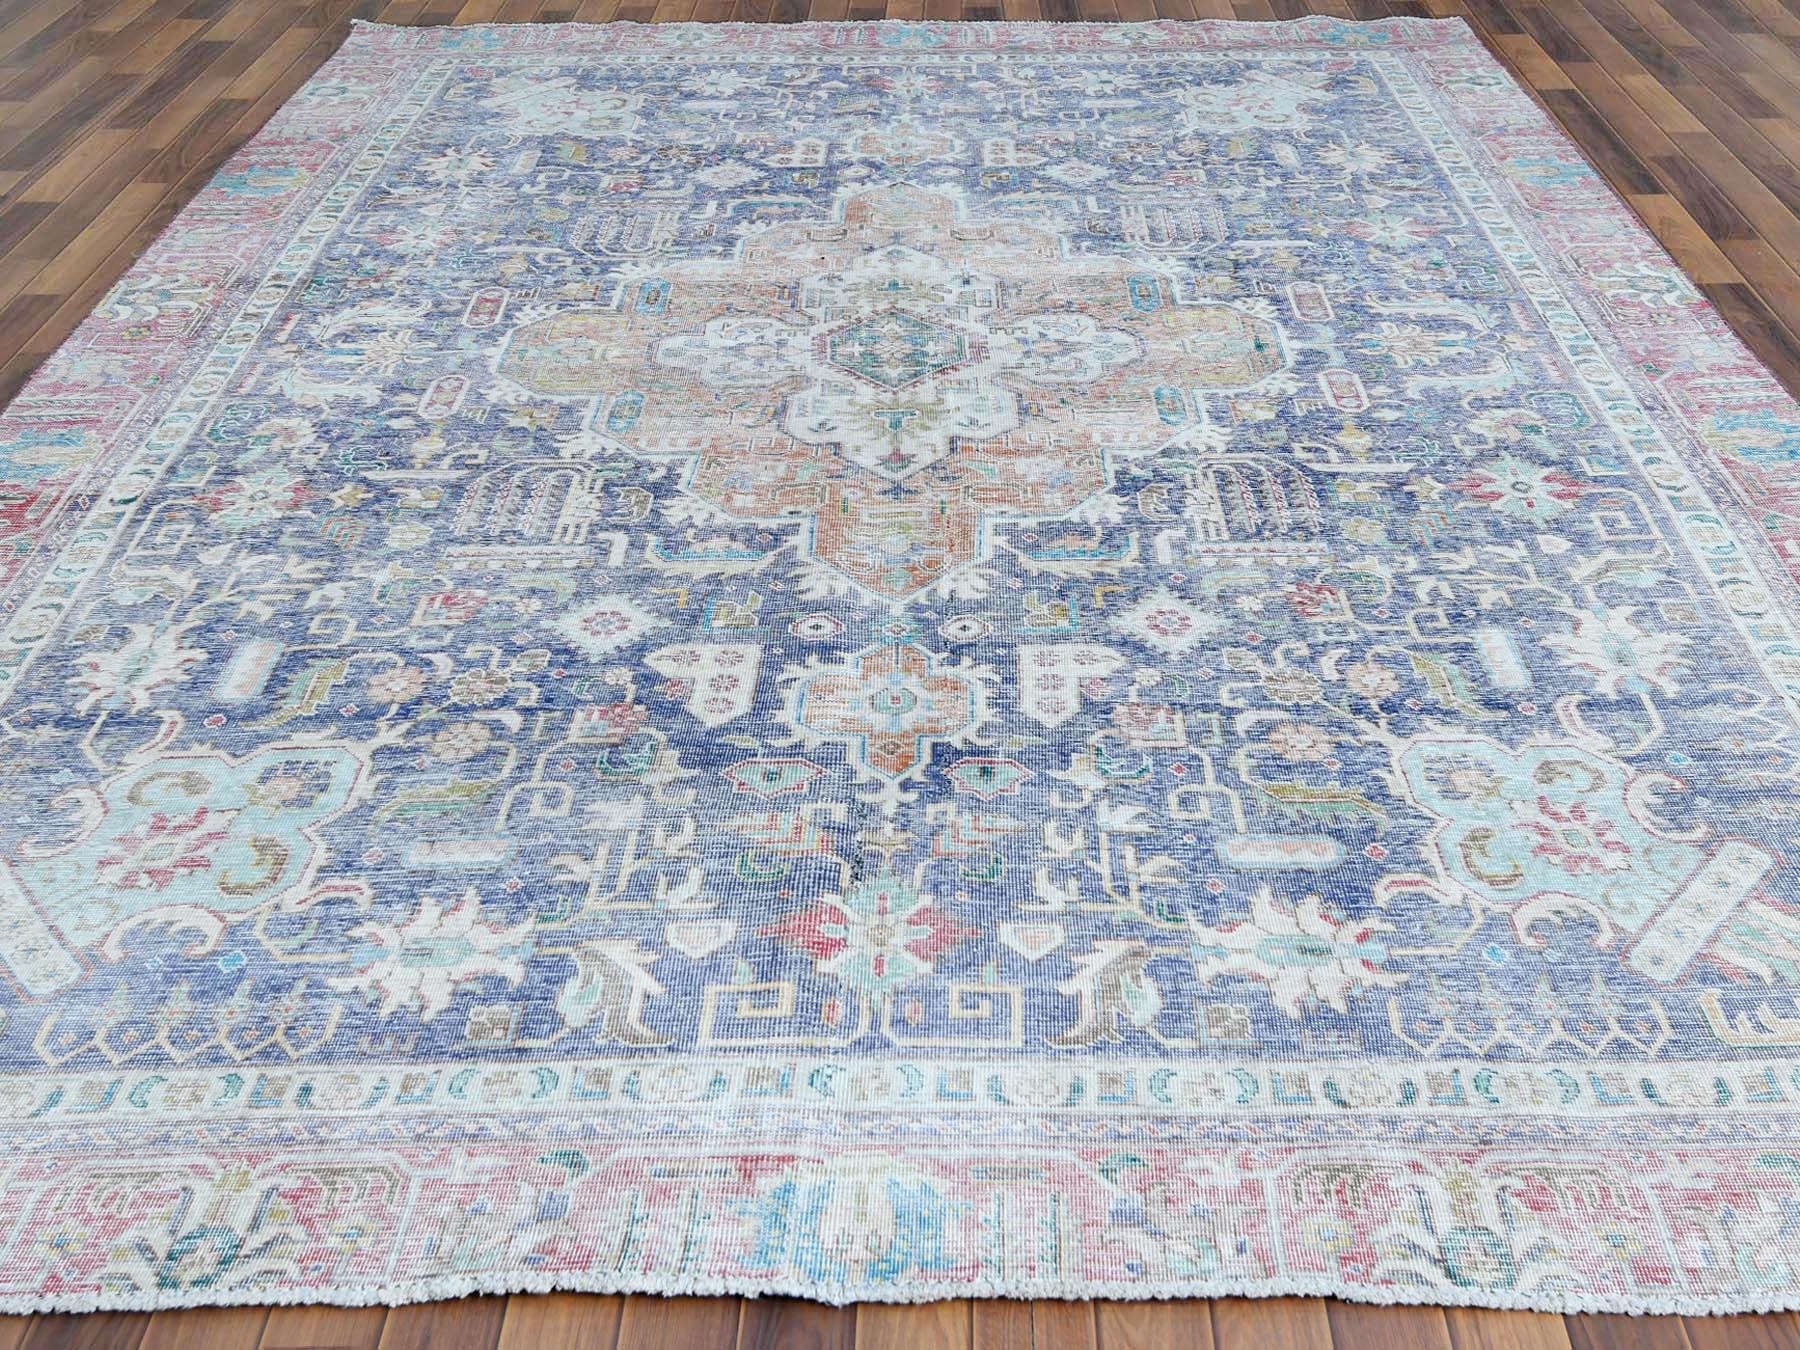 Medieval Semi Antique Navy Blue Persian Tabriz Distressed Look Hand Knotted Pure Wool Rug